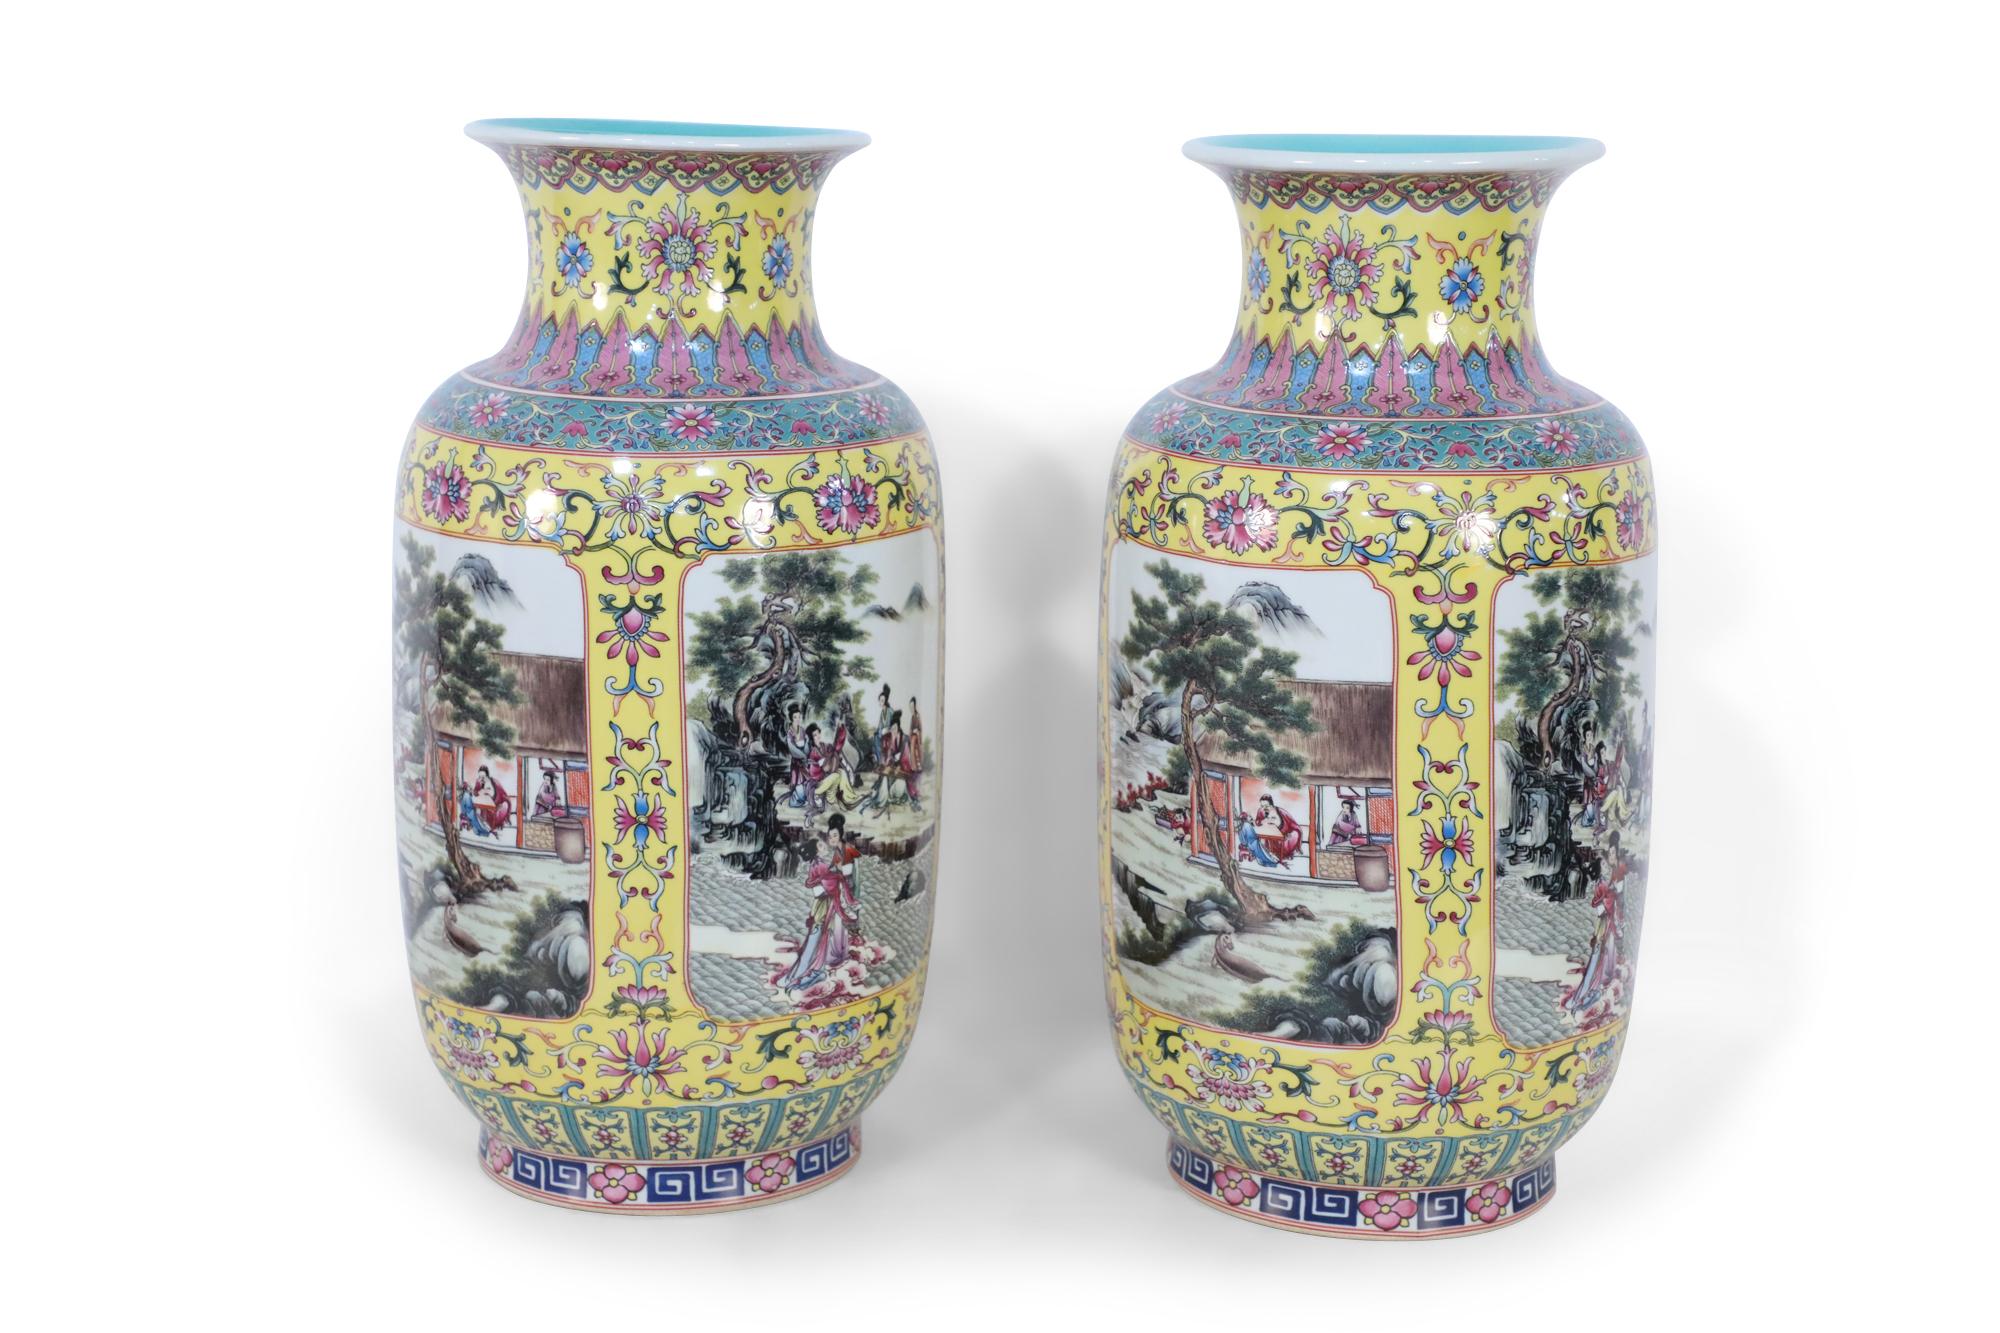 Pair of Chinese Yellow and Turquoise Genre Vignette Porcelain Vases 5